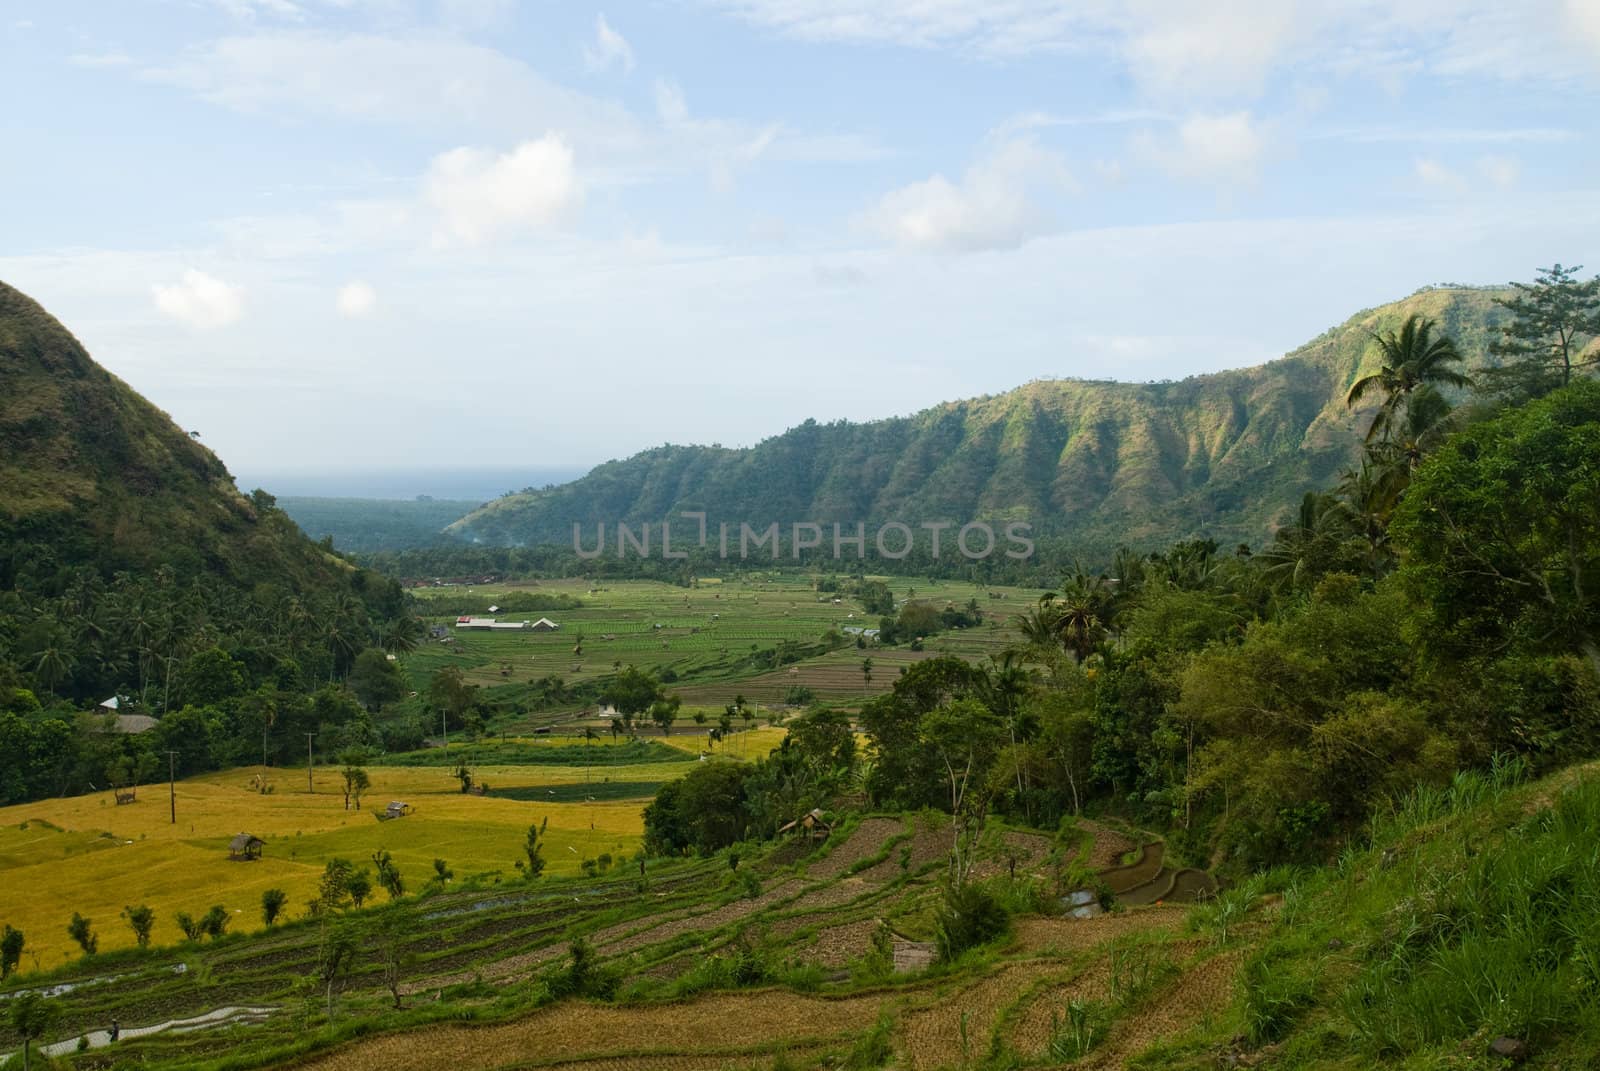 Balinese landscape with terraced rice paddies and hills